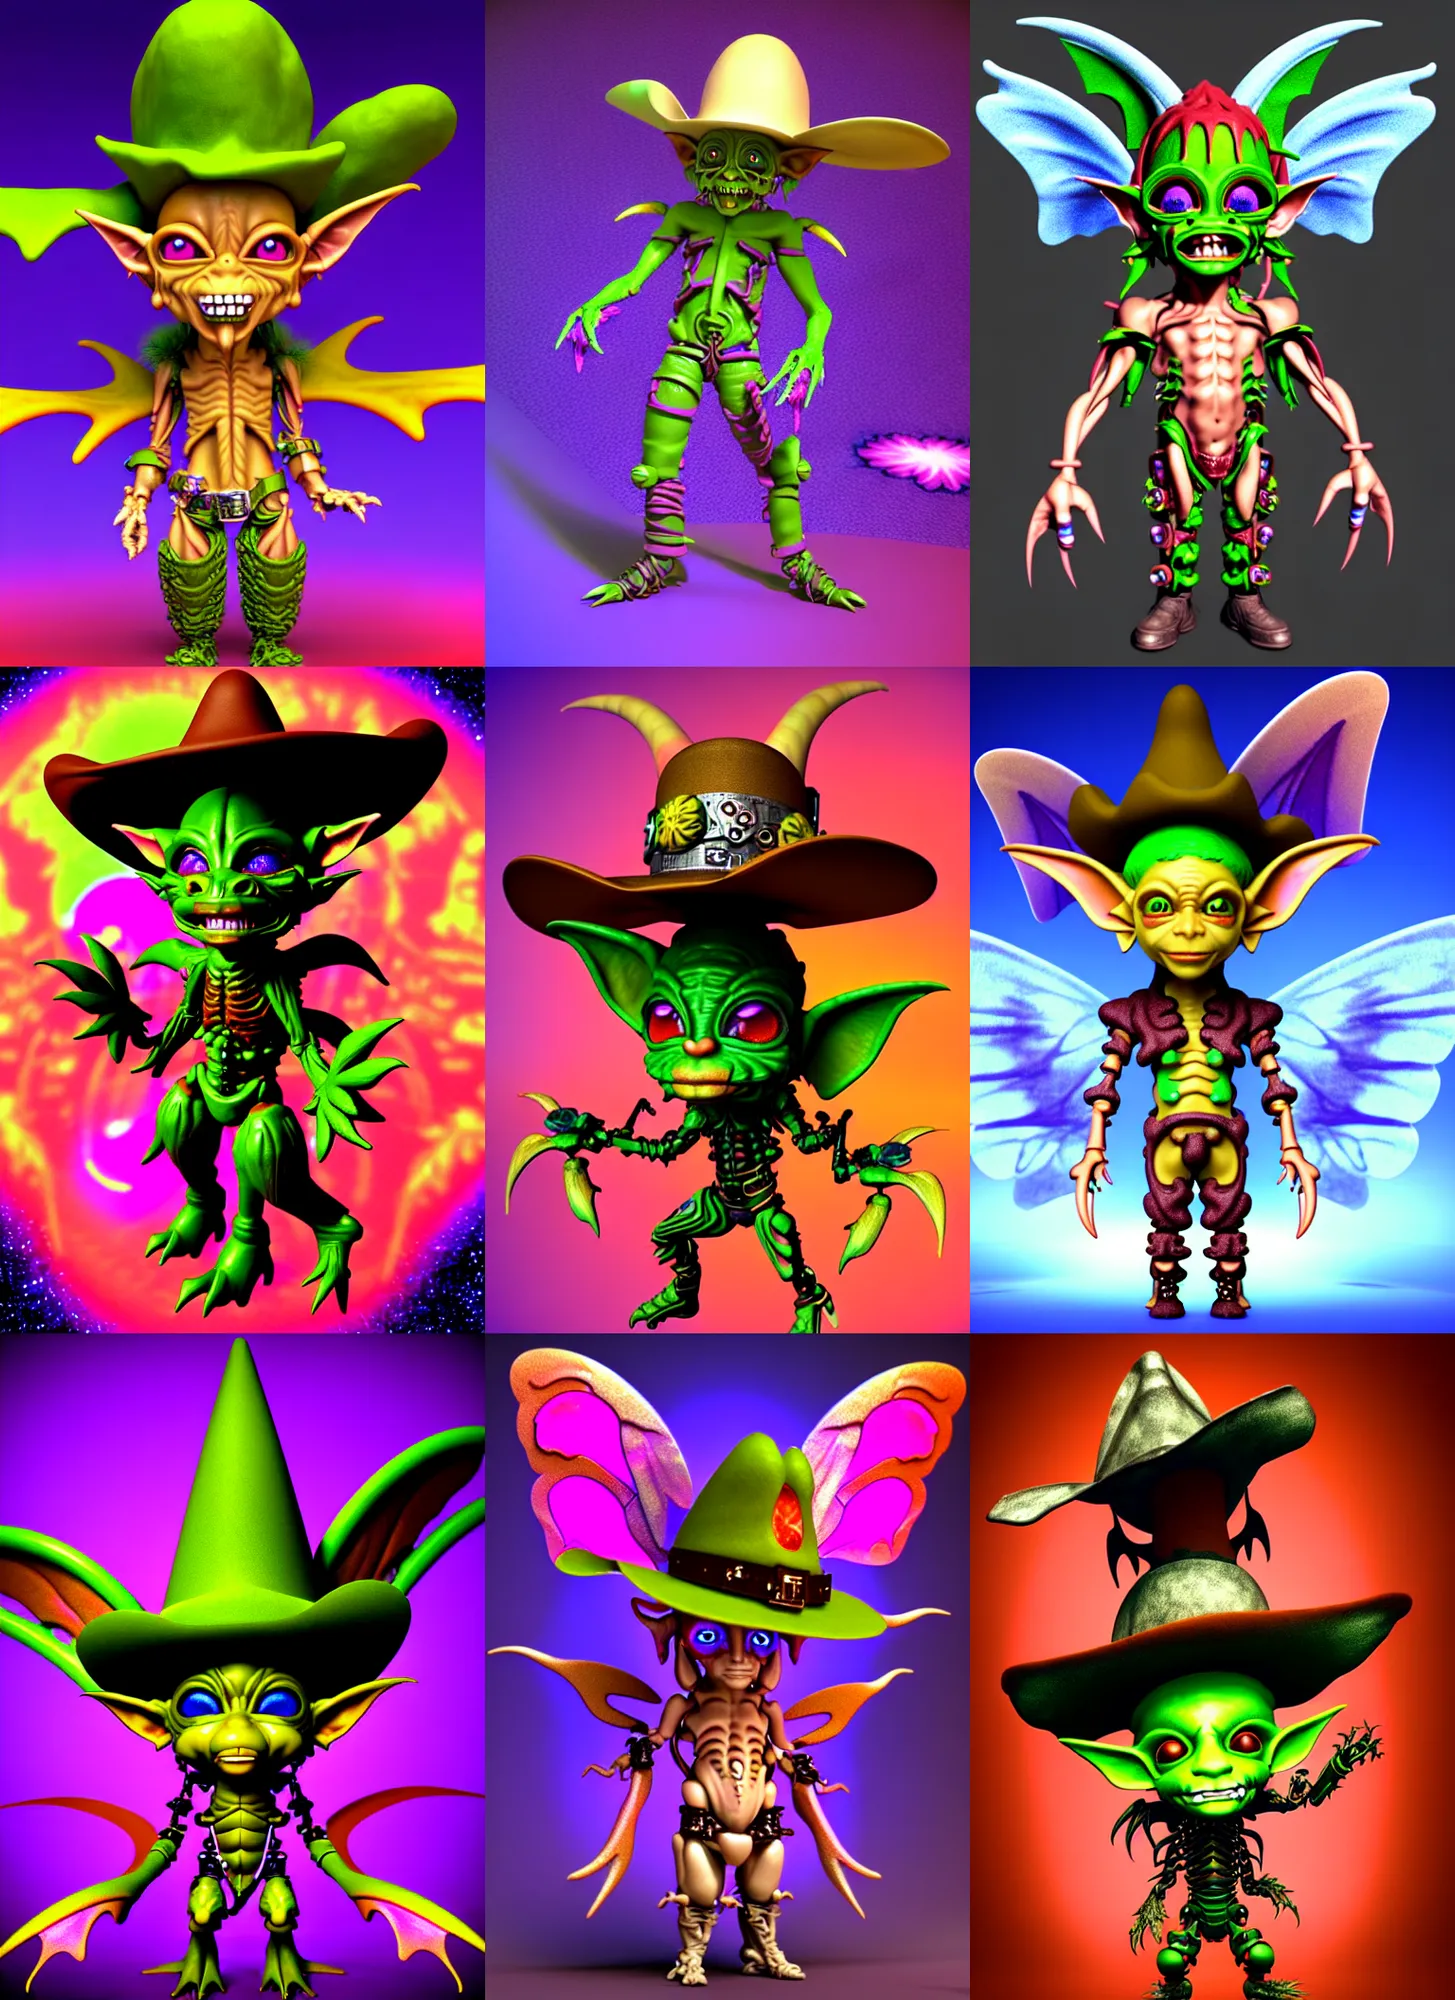 Prompt: 3d render of chibi cyborg goblin elf by Ichiro Tanida wearing a big cowboy hat and wearing angel wings against a psychedelic swirly background with 3d butterflies and 3d flowers n the style of 1990's CG graphics 3d rendered y2K aesthetic by Ichiro Tanida, 3DO magazine